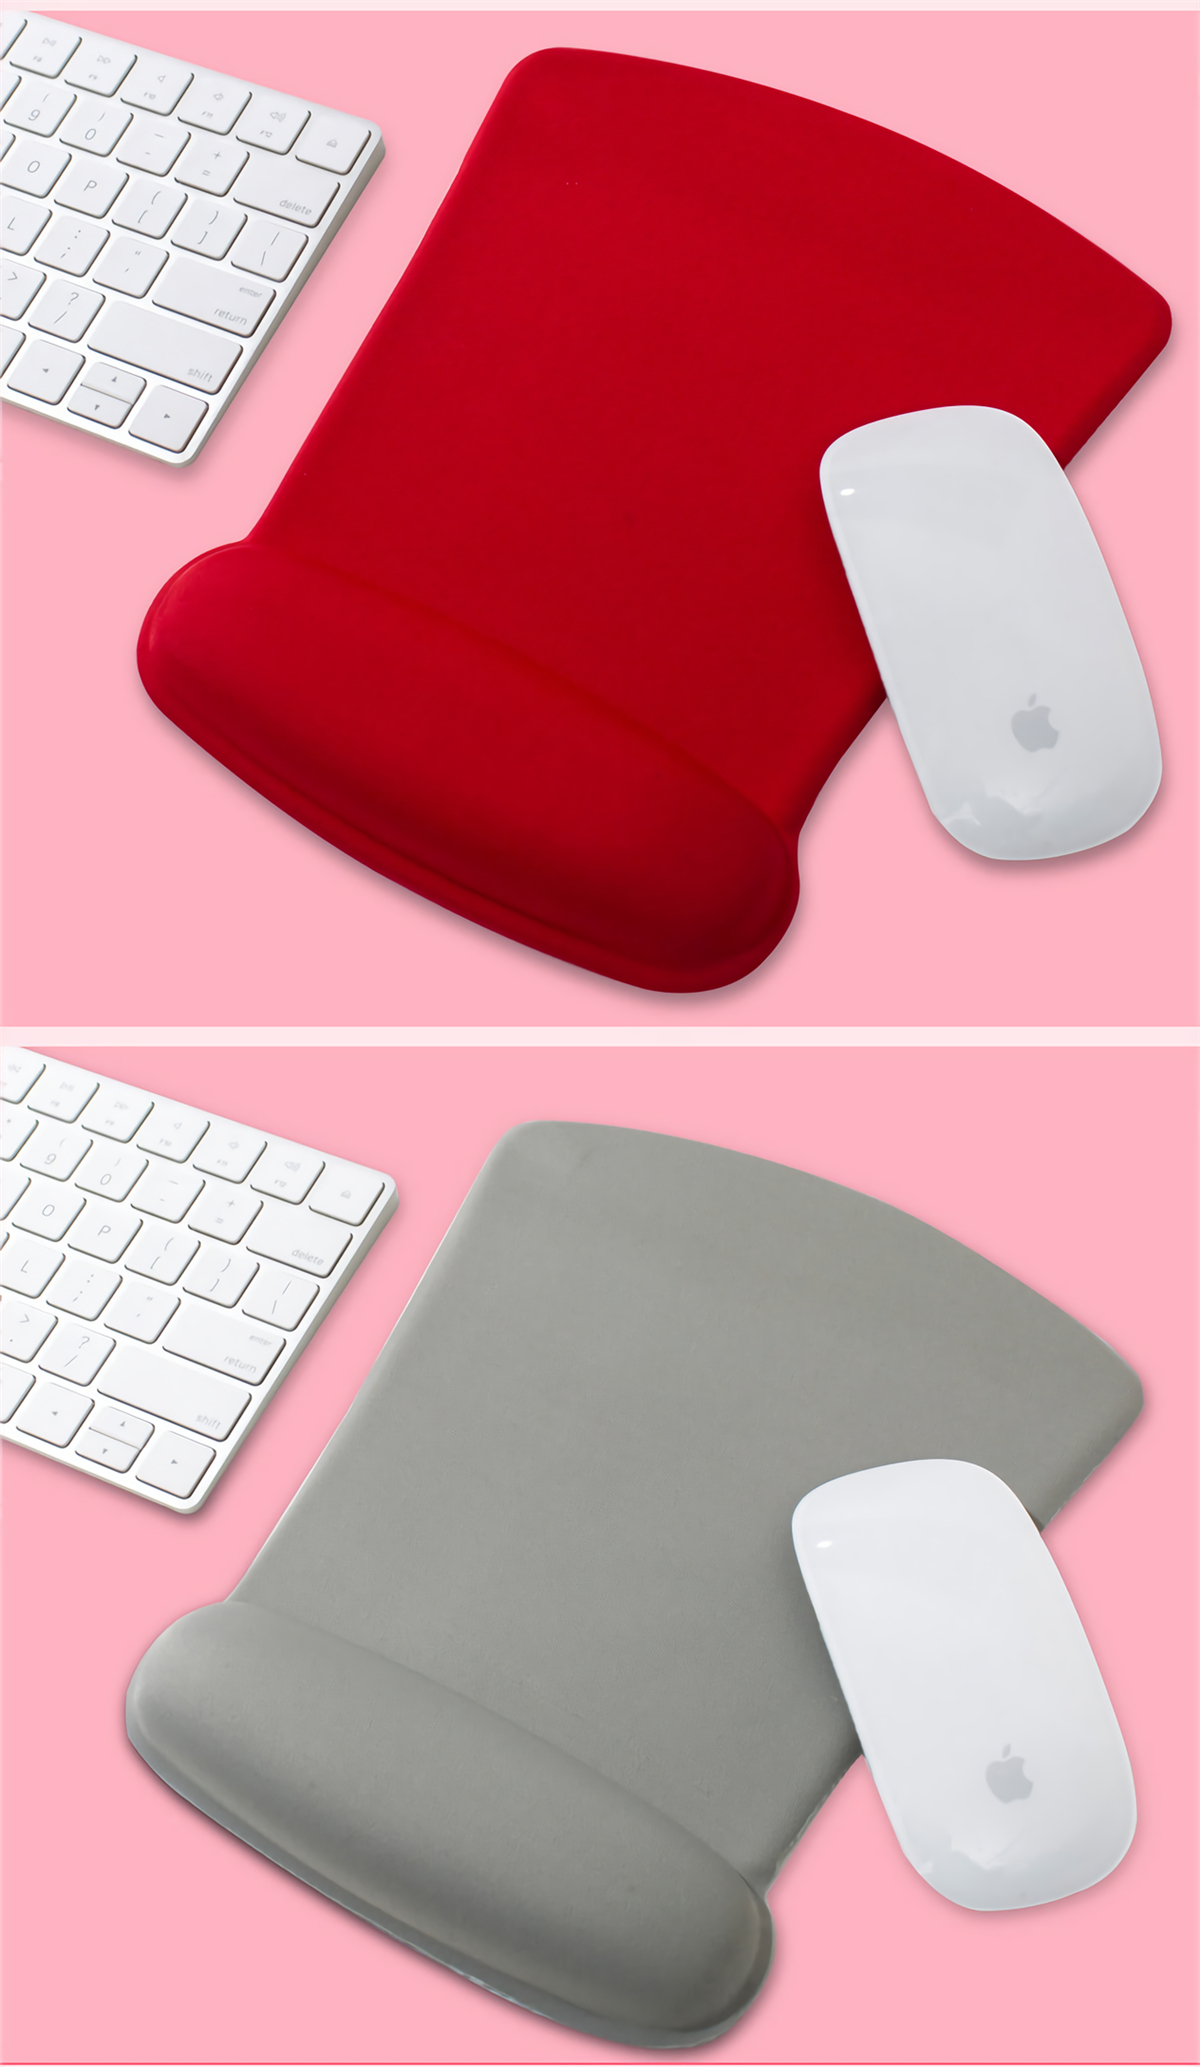 MONTIAN MF-02 Slow Rebound Mouse Pad Fan-shaped Memory Foam Soft Hand Rest Wrist Pad Anti-skid Wrist Support for Home Office